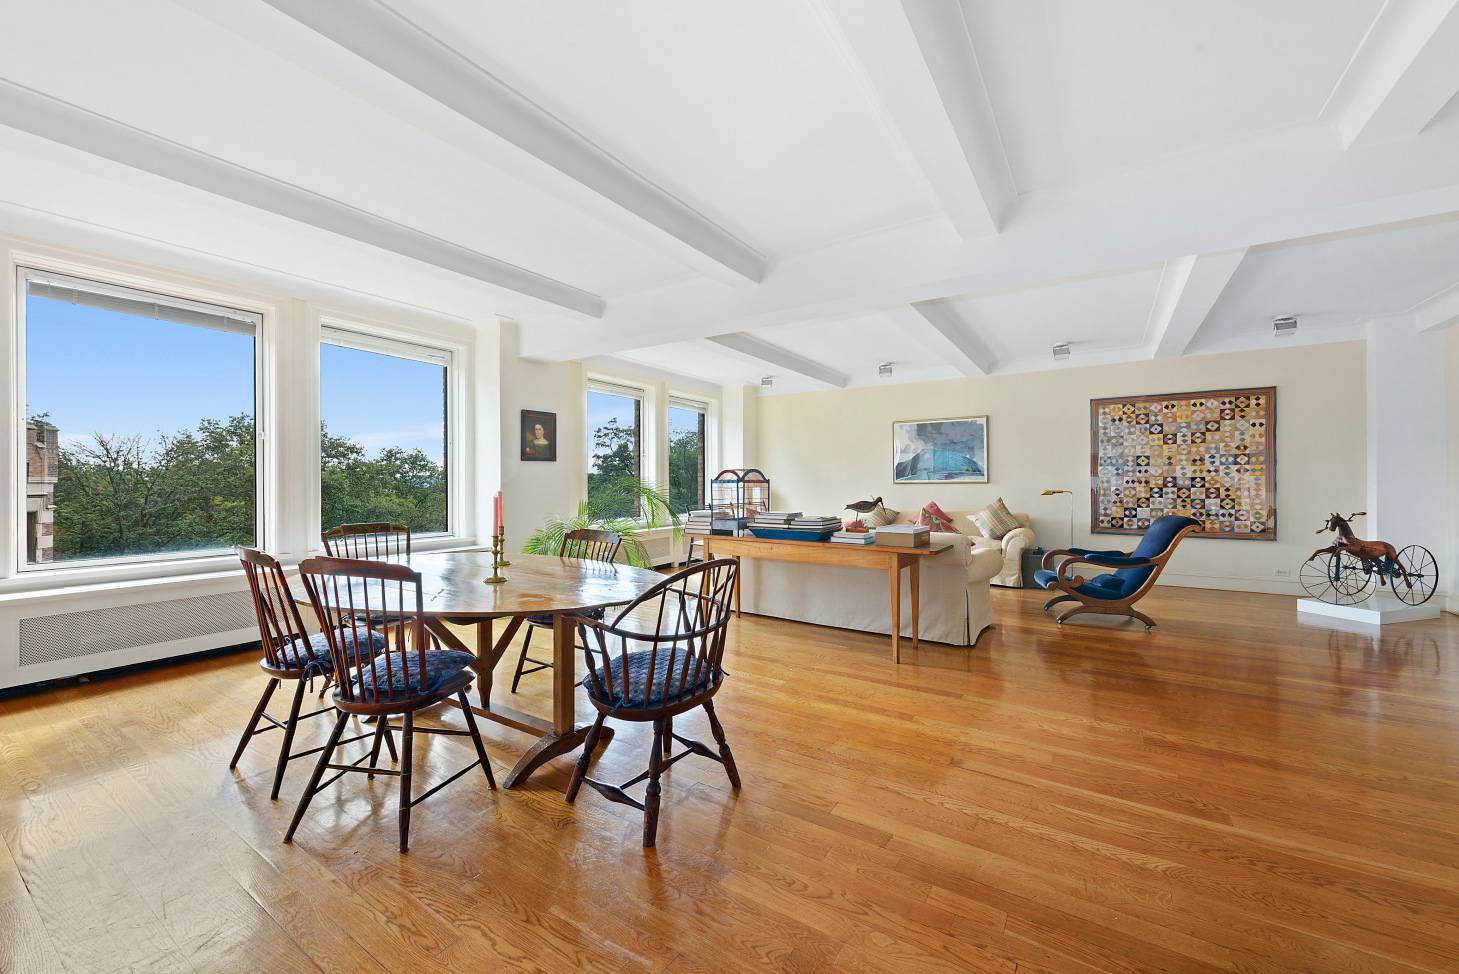 Sitting high atop the Upper West Side, the coveted A line in 110 Riverside Drive is the largest and most sought after apartment in the building, graced with sunshine throughout ...